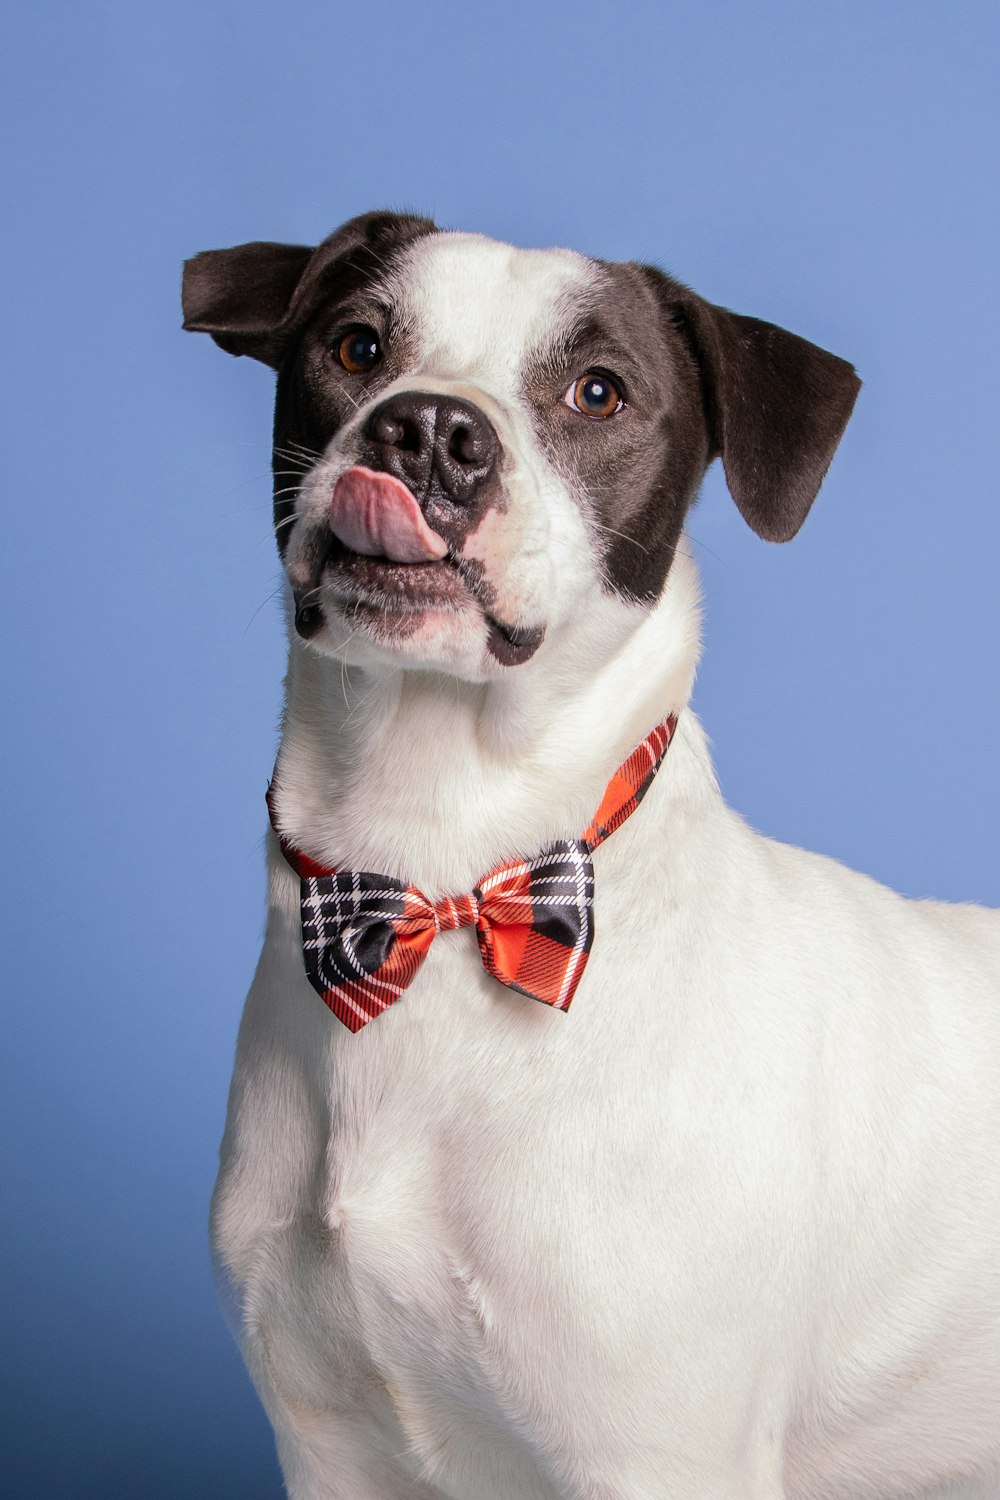 a dog with a bow tie